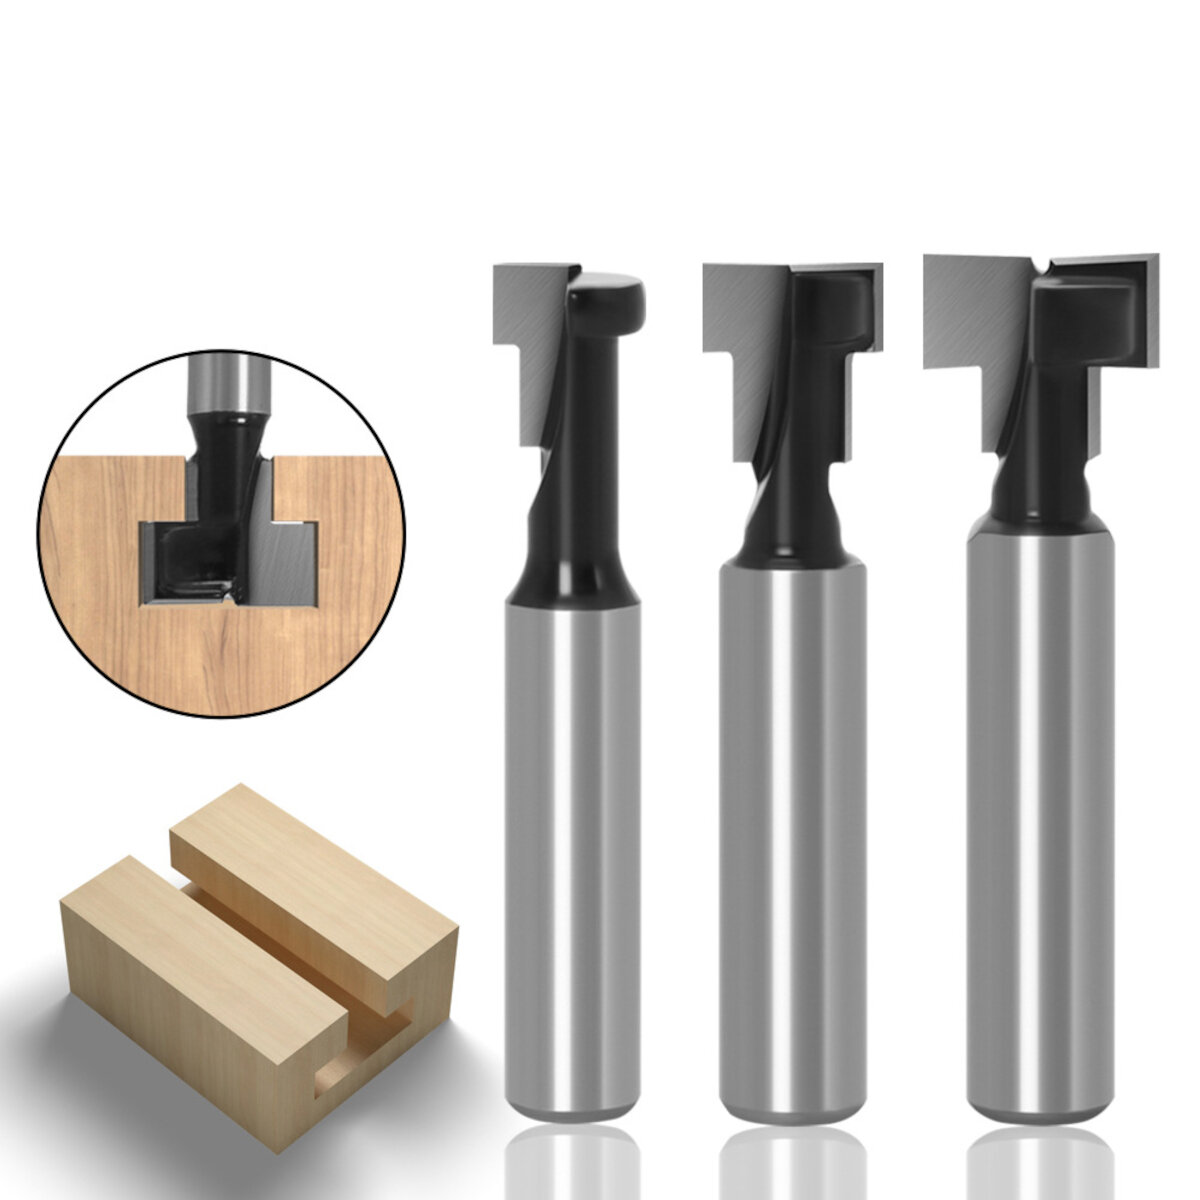 Drillpro 8mm Shank T-Slot Keyhole Cutter Wood Router Bit Carbide Cutter For Wood Hex Bolt T-Track Slotting Milling Cutte